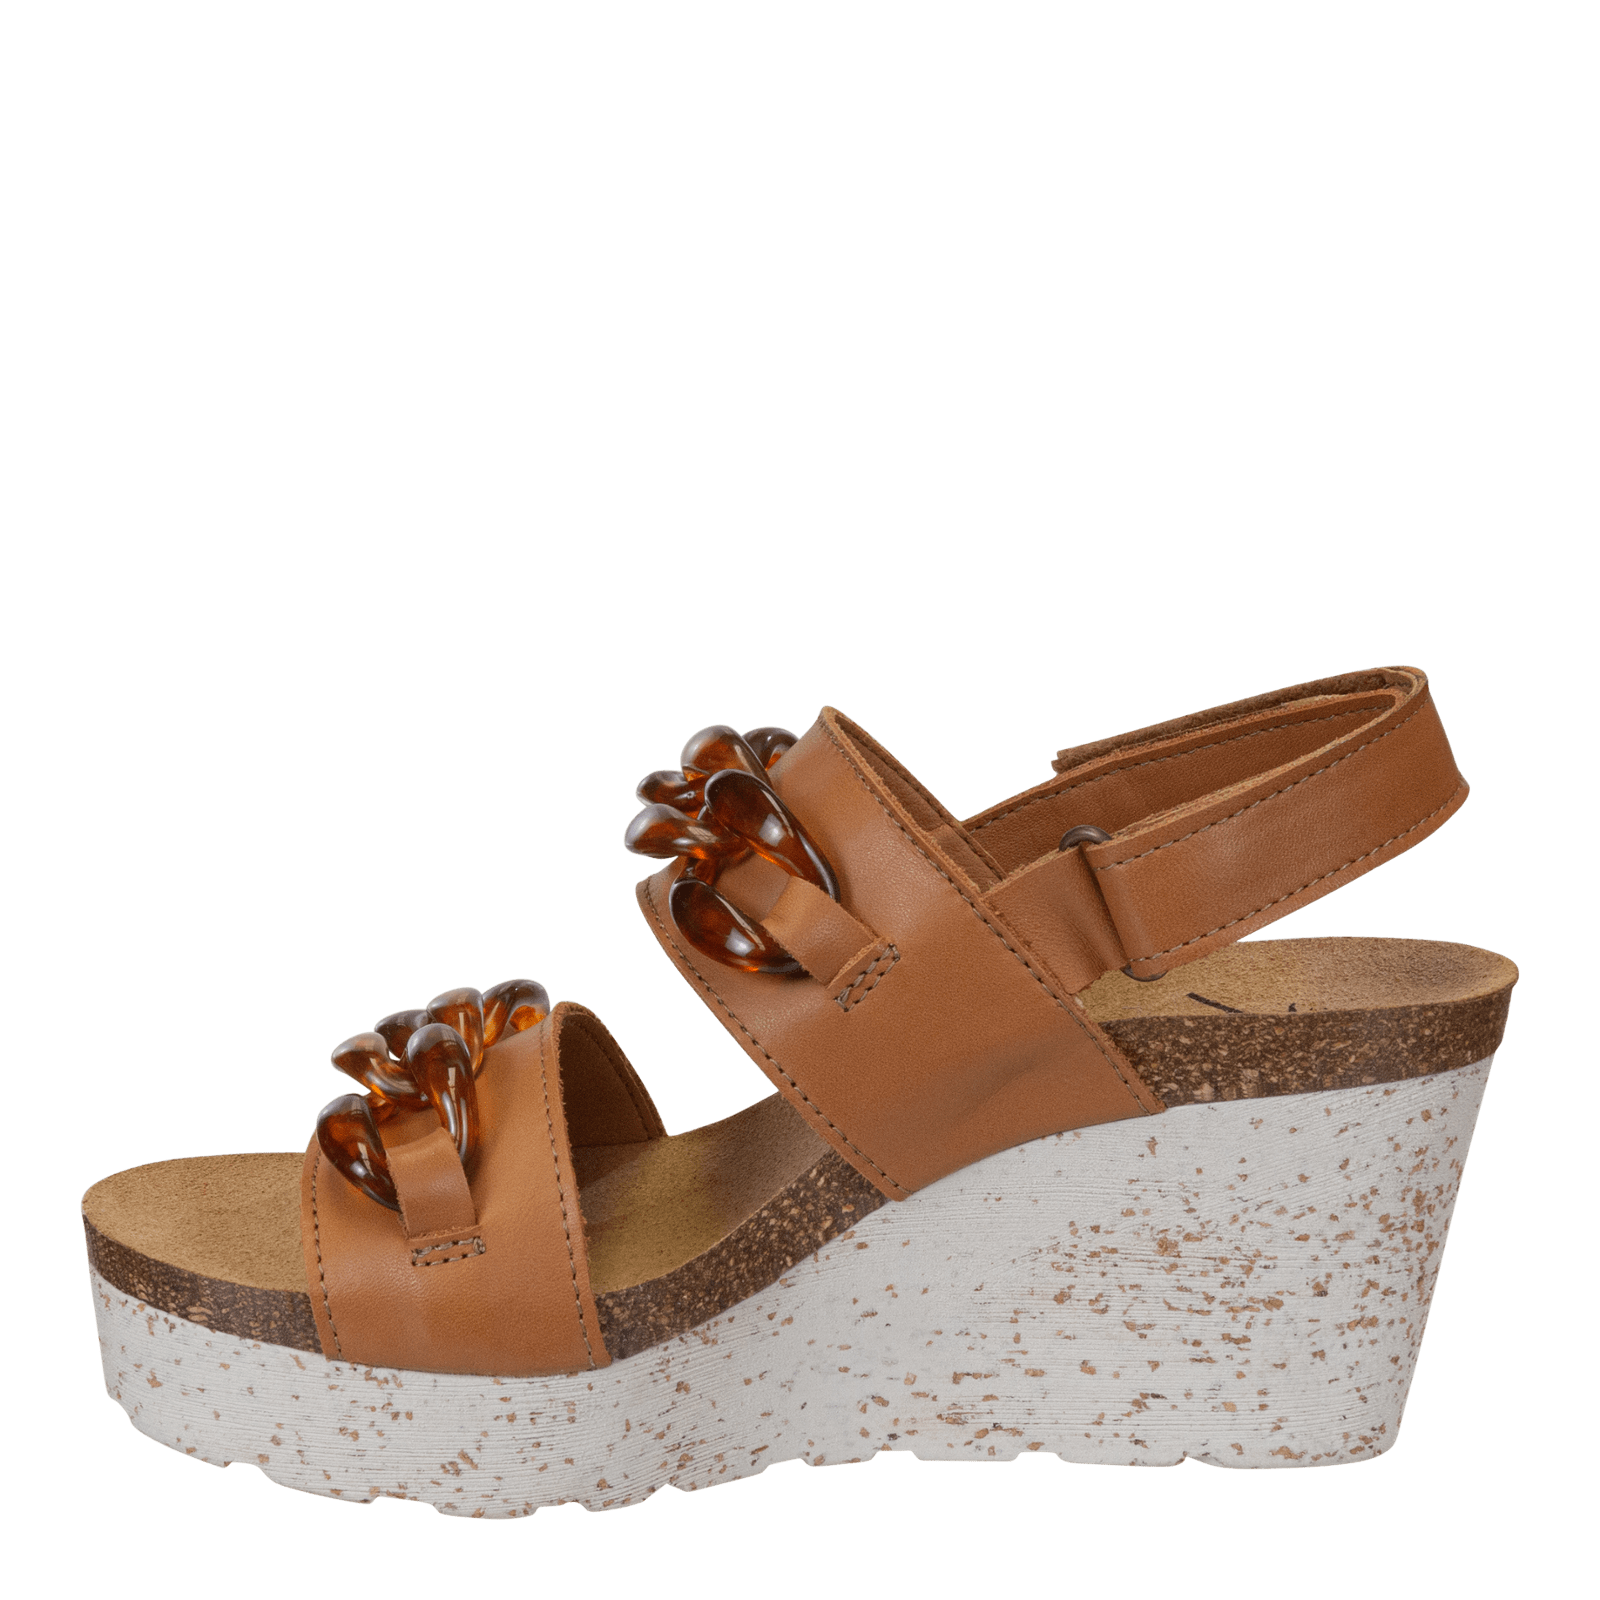 Women's Closed Toe Wedges  Comfortable Closed Toe Summer Wedges - OTBT  shoes